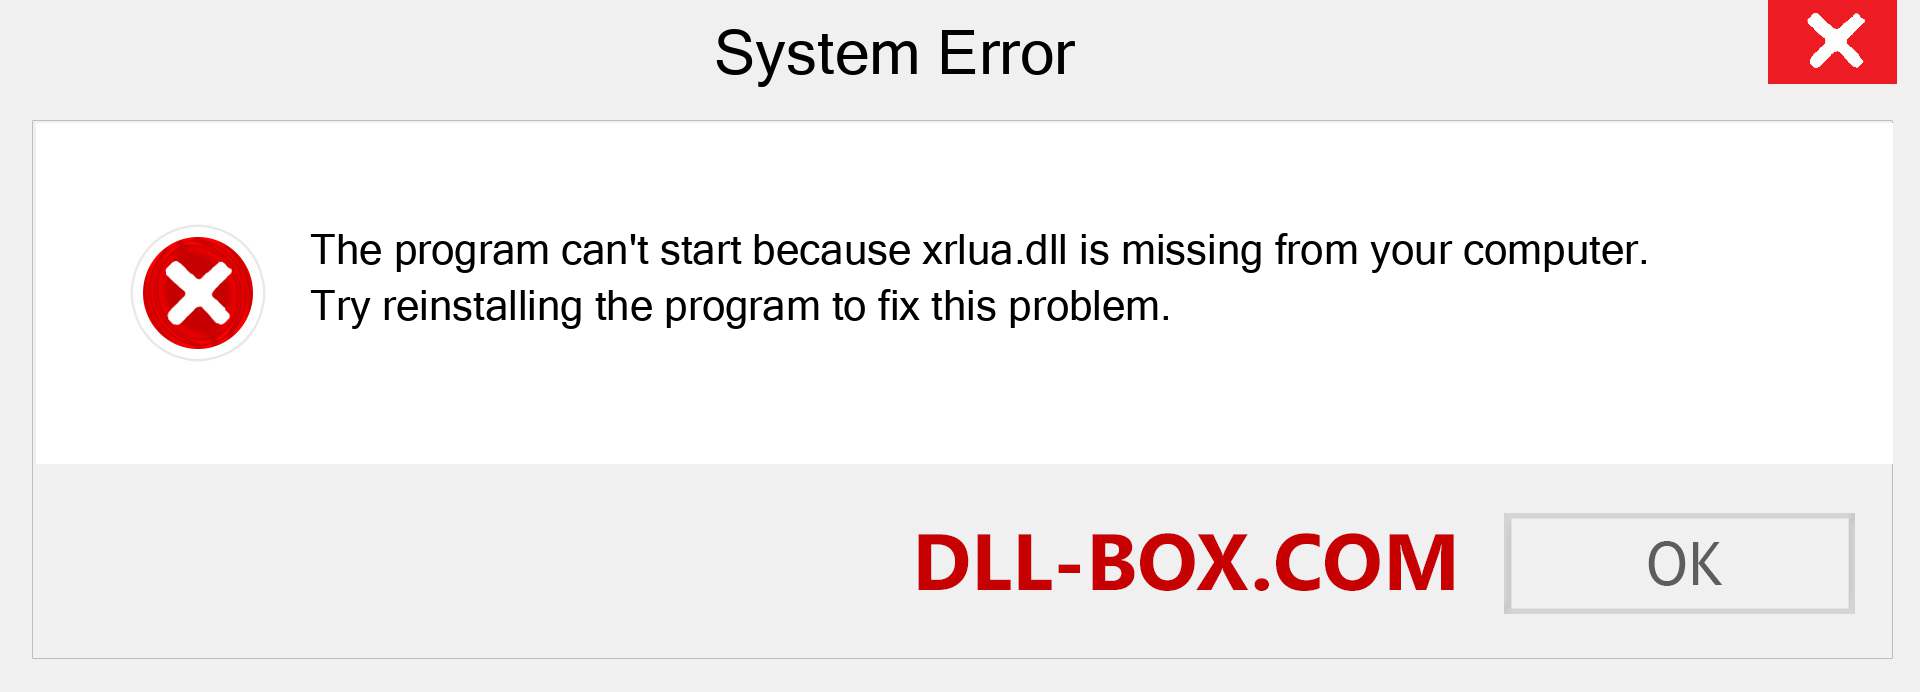  xrlua.dll file is missing?. Download for Windows 7, 8, 10 - Fix  xrlua dll Missing Error on Windows, photos, images